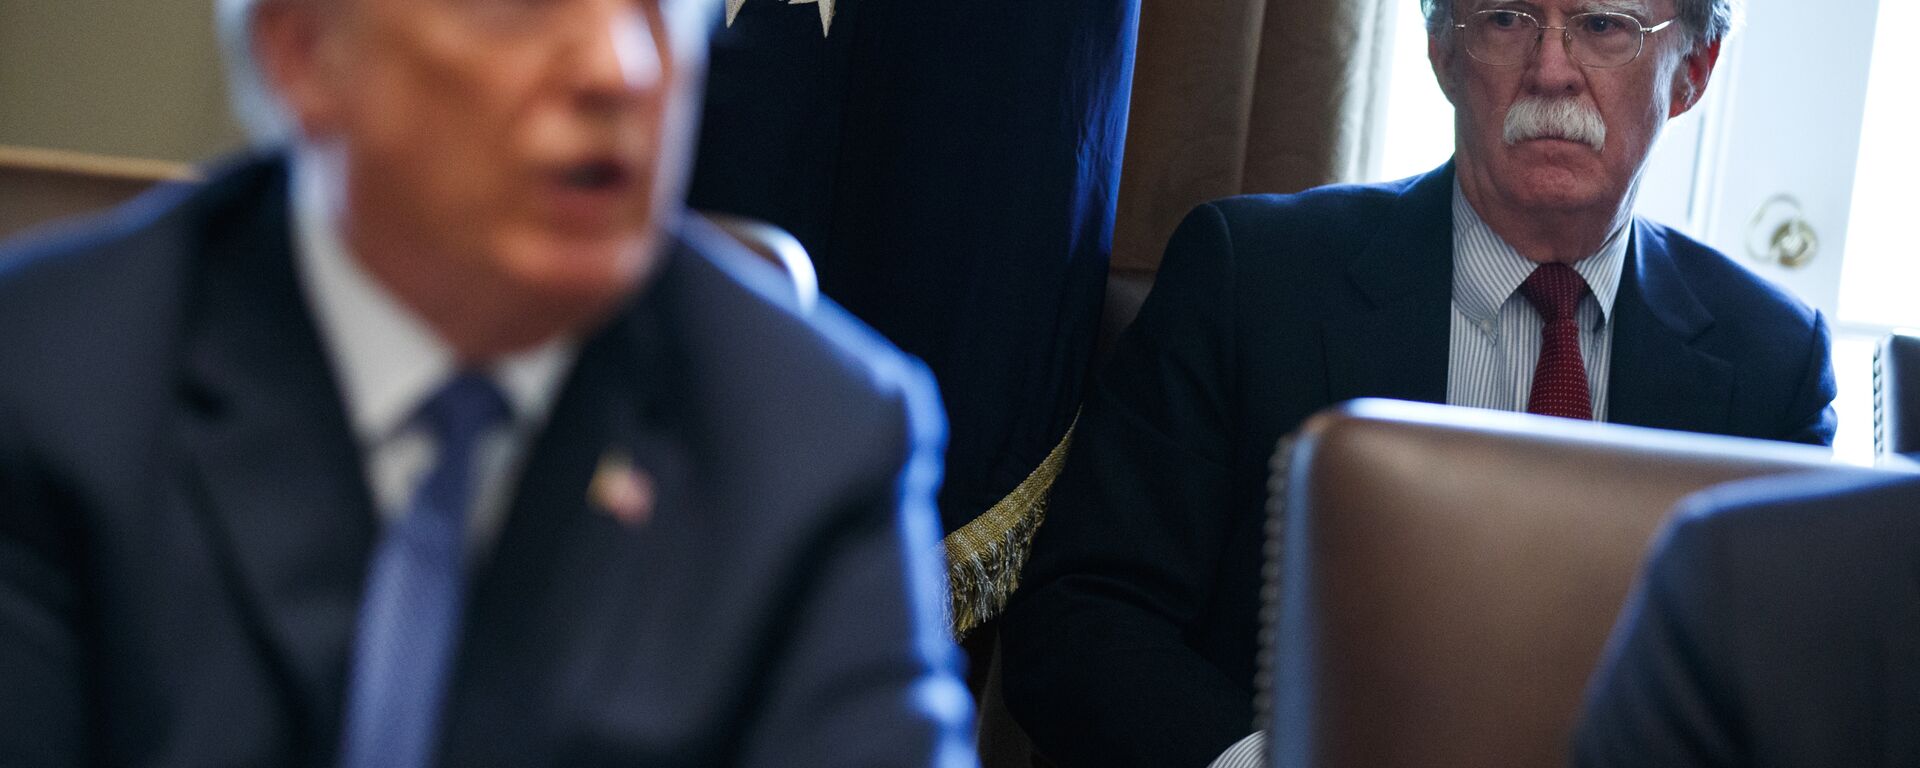 National security adviser John Bolton listens as President Donald Trump speaks during a cabinet meeting at the White House, Monday, April 9, 2018, in Washington - Sputnik International, 1920, 15.11.2021